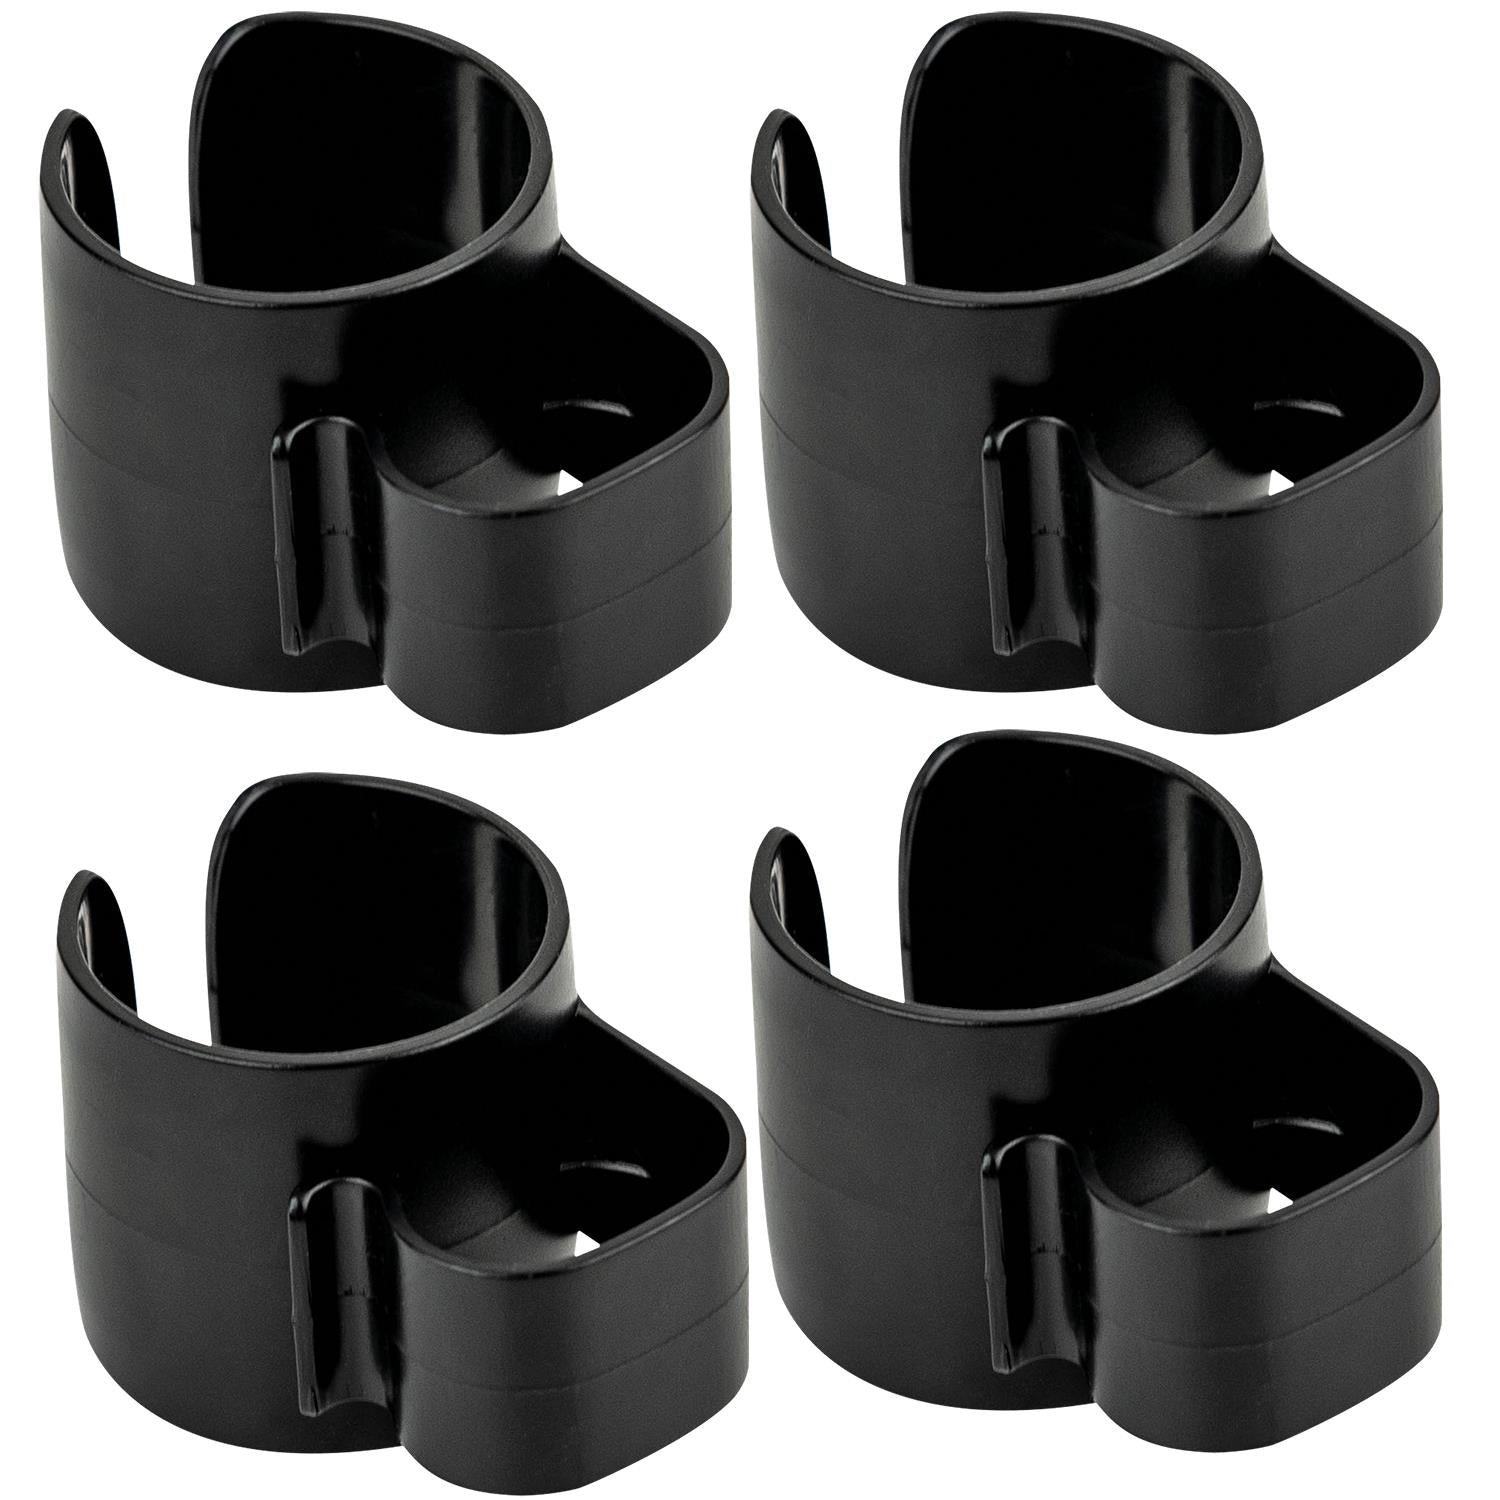 4 x Showgear 35mm ABS Cable Clamp Protector